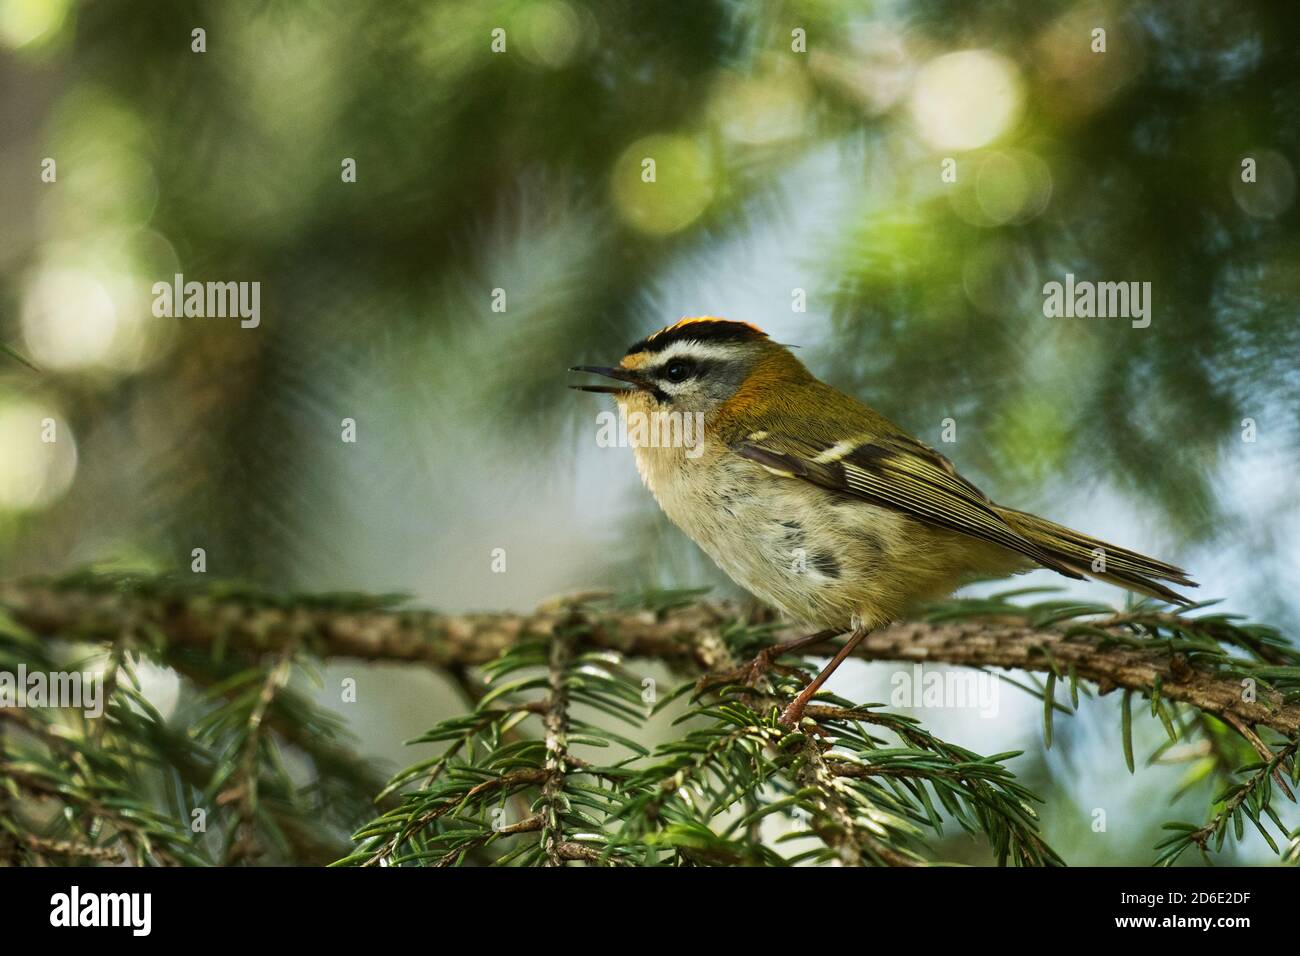 Small European songbird Common Firecrest, Regulus ignicapilla, singing during a breeding season in summer in a boreal forest in Estonian nature. Stock Photo